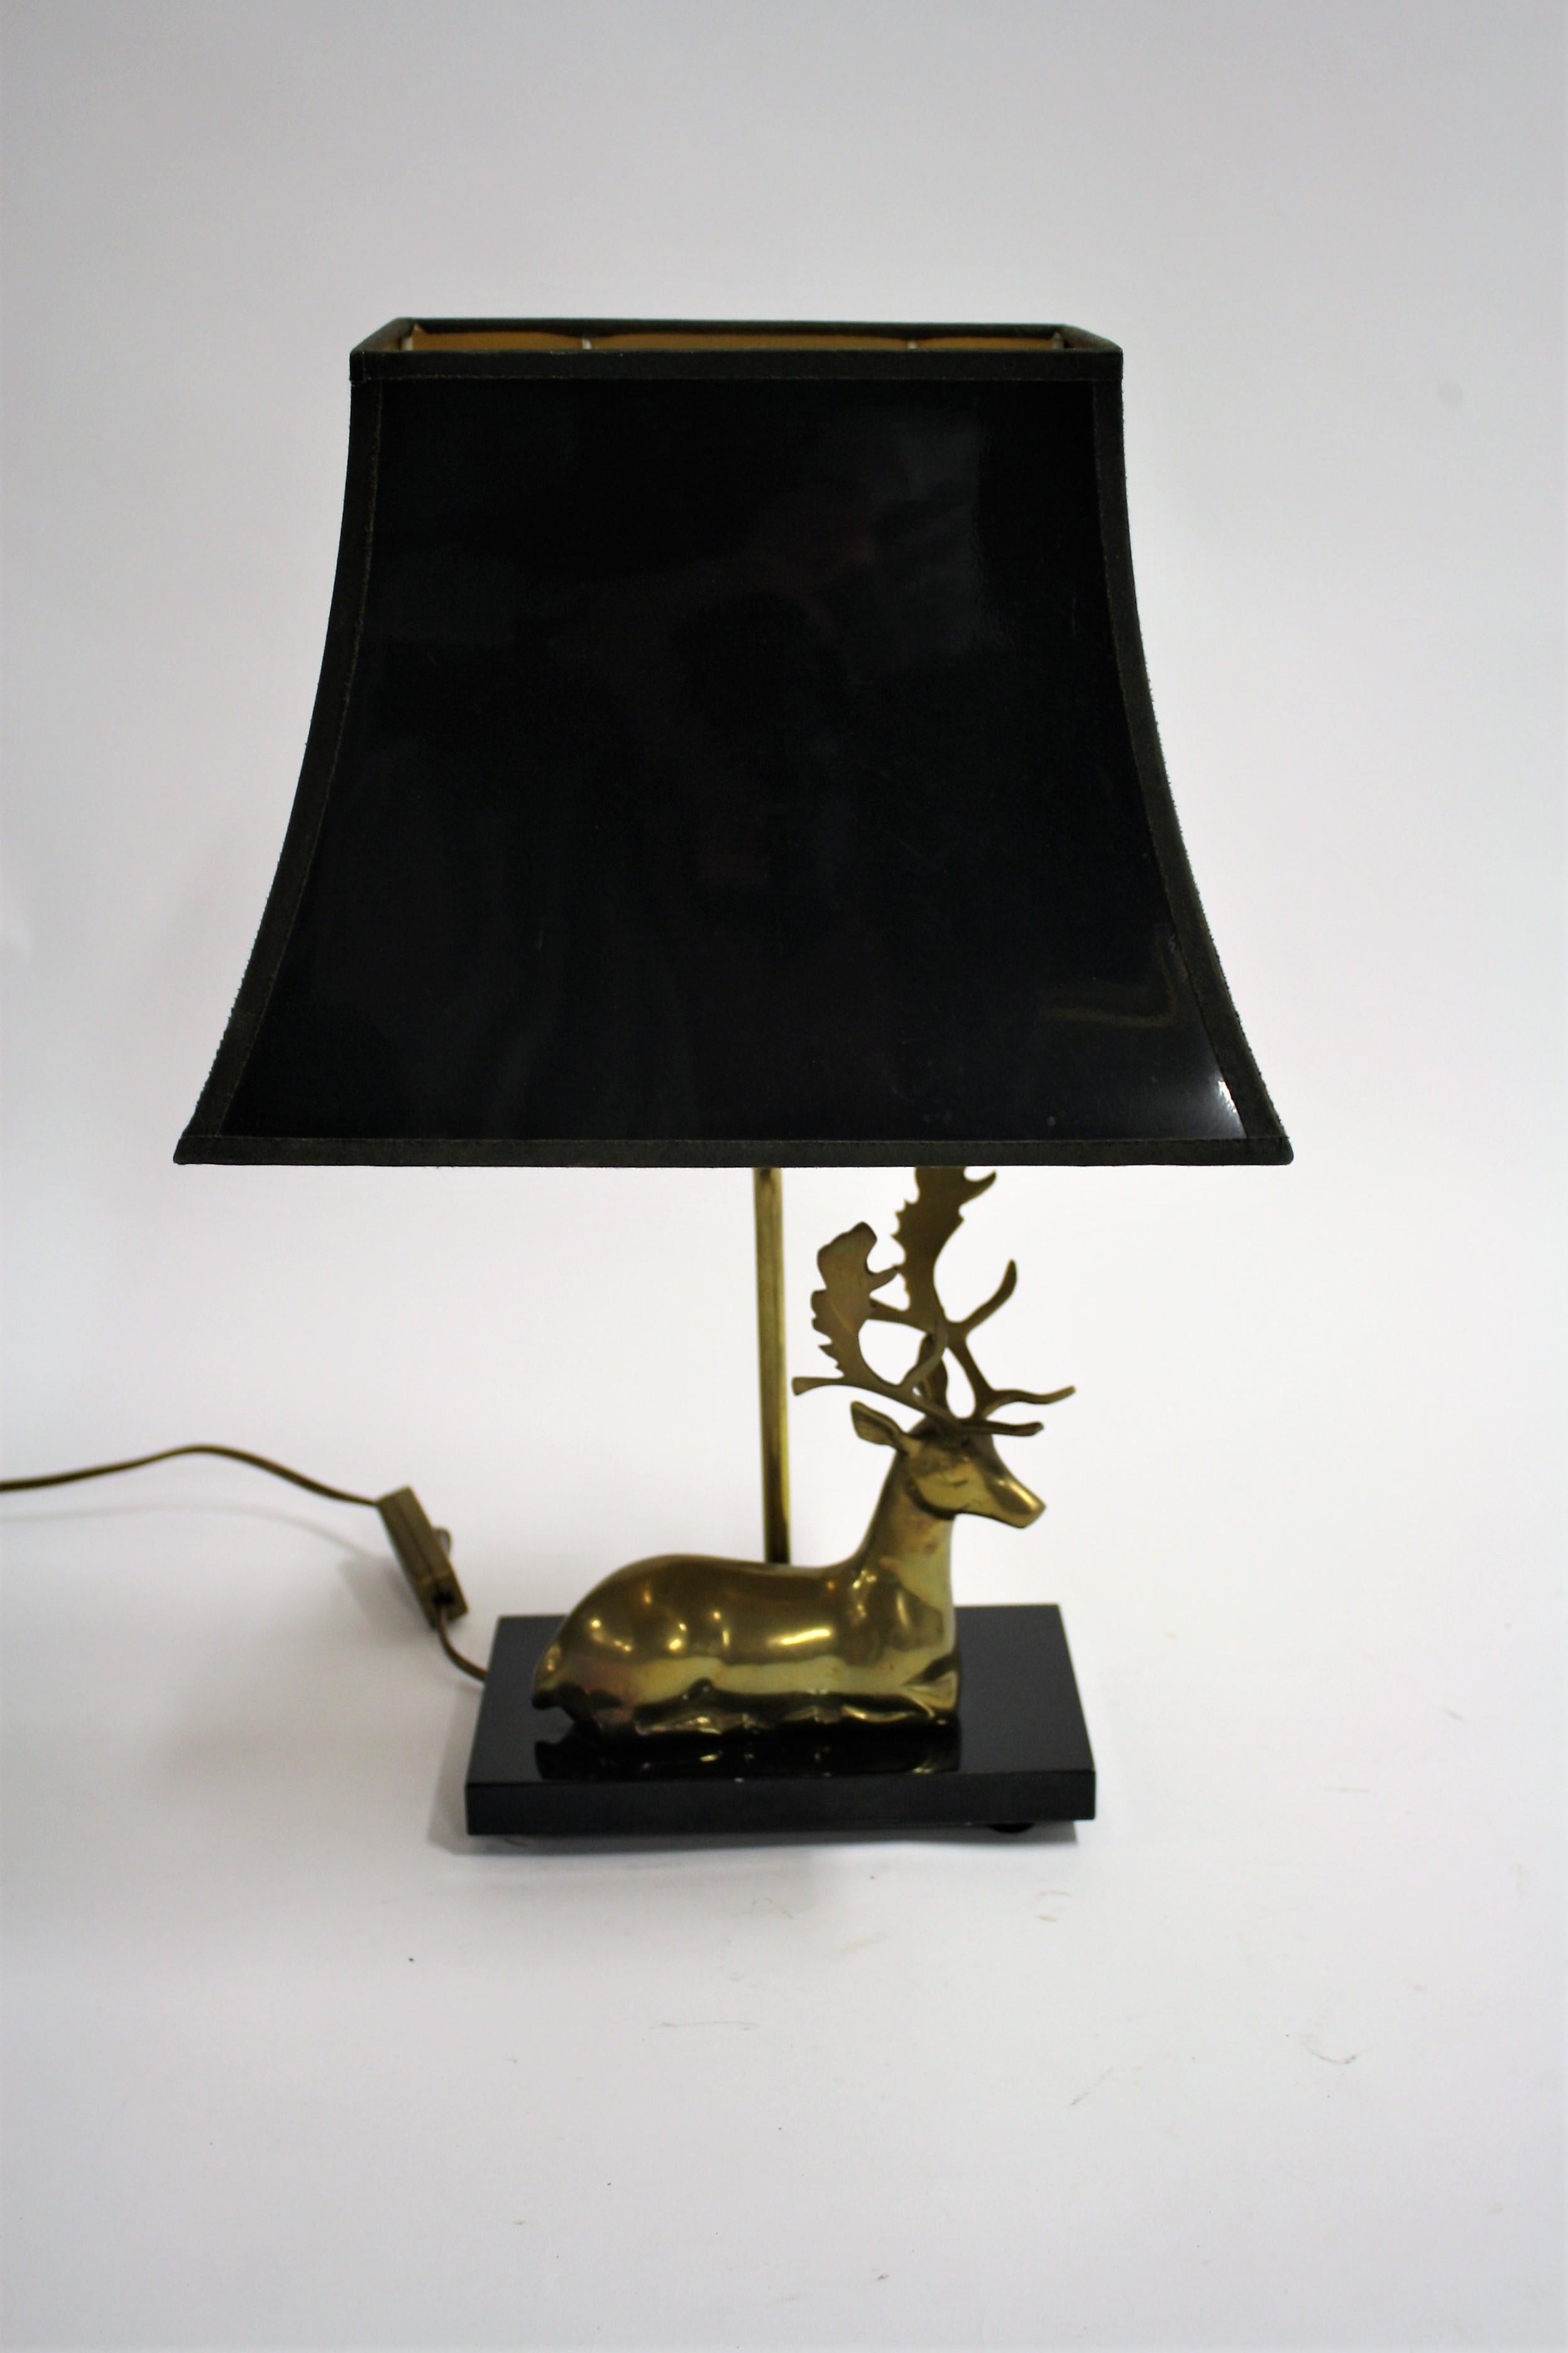 Hollywood Regency style table lamp featuring a patinated brass deer sculpture mounted on a black lacquered wooden base.

The lamp comes with the original lacquered and golden finished shade.

Tested and ready for use with a regular E26/E27 light